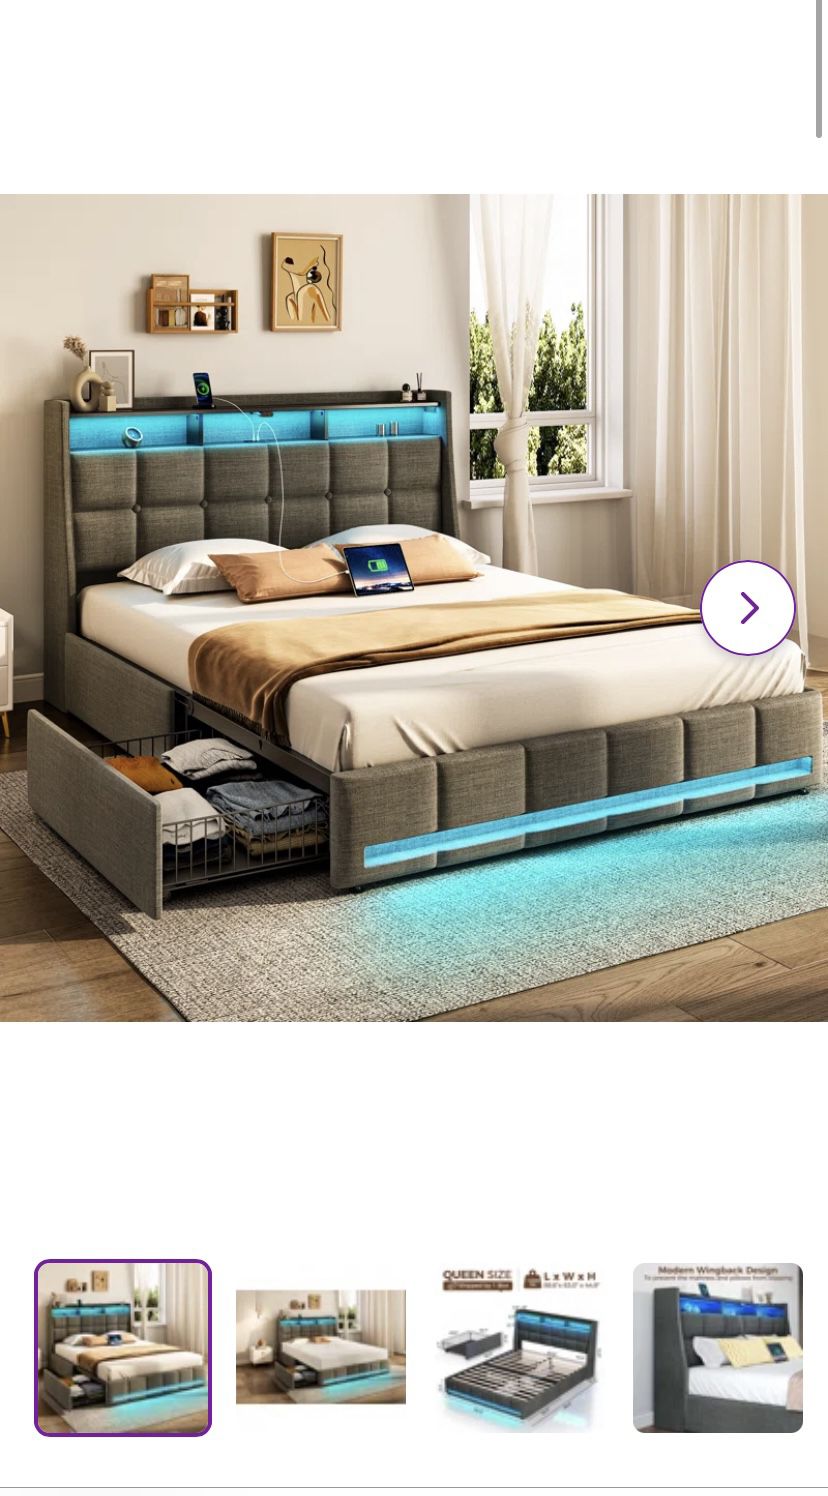 Queen Size LED Bedframe